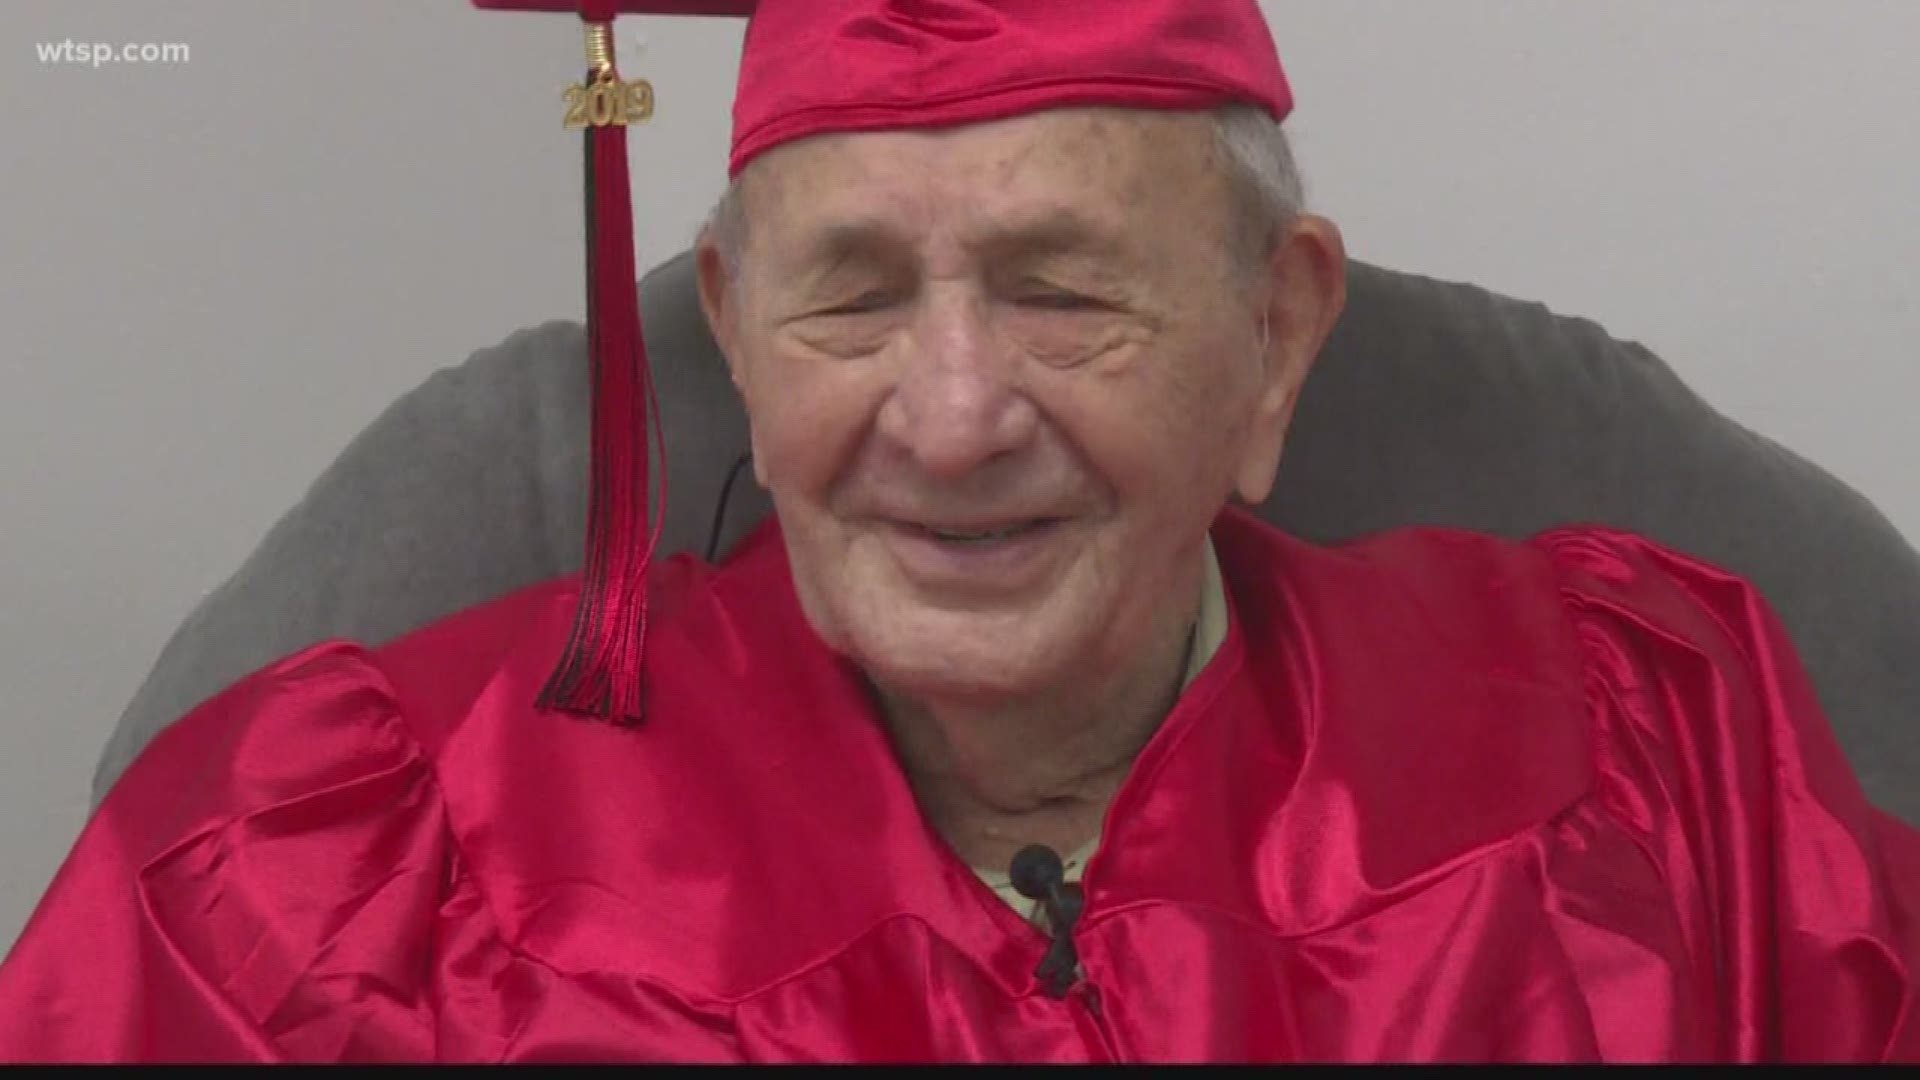 At Hillsborough High School’s graduation Saturday, one graduate stood out. At 95, he's older than even the faculty at his ceremony.

“Joe Perricone is a member of the Hillsborough High School class of 1943,” Principal Gary Brady explained at the ceremony.

Perricone got his diploma in 1943, but he missed his graduation. Before the school year ended, he'd already enlisted in the Army. He deployed to Europe to fight in World War II.